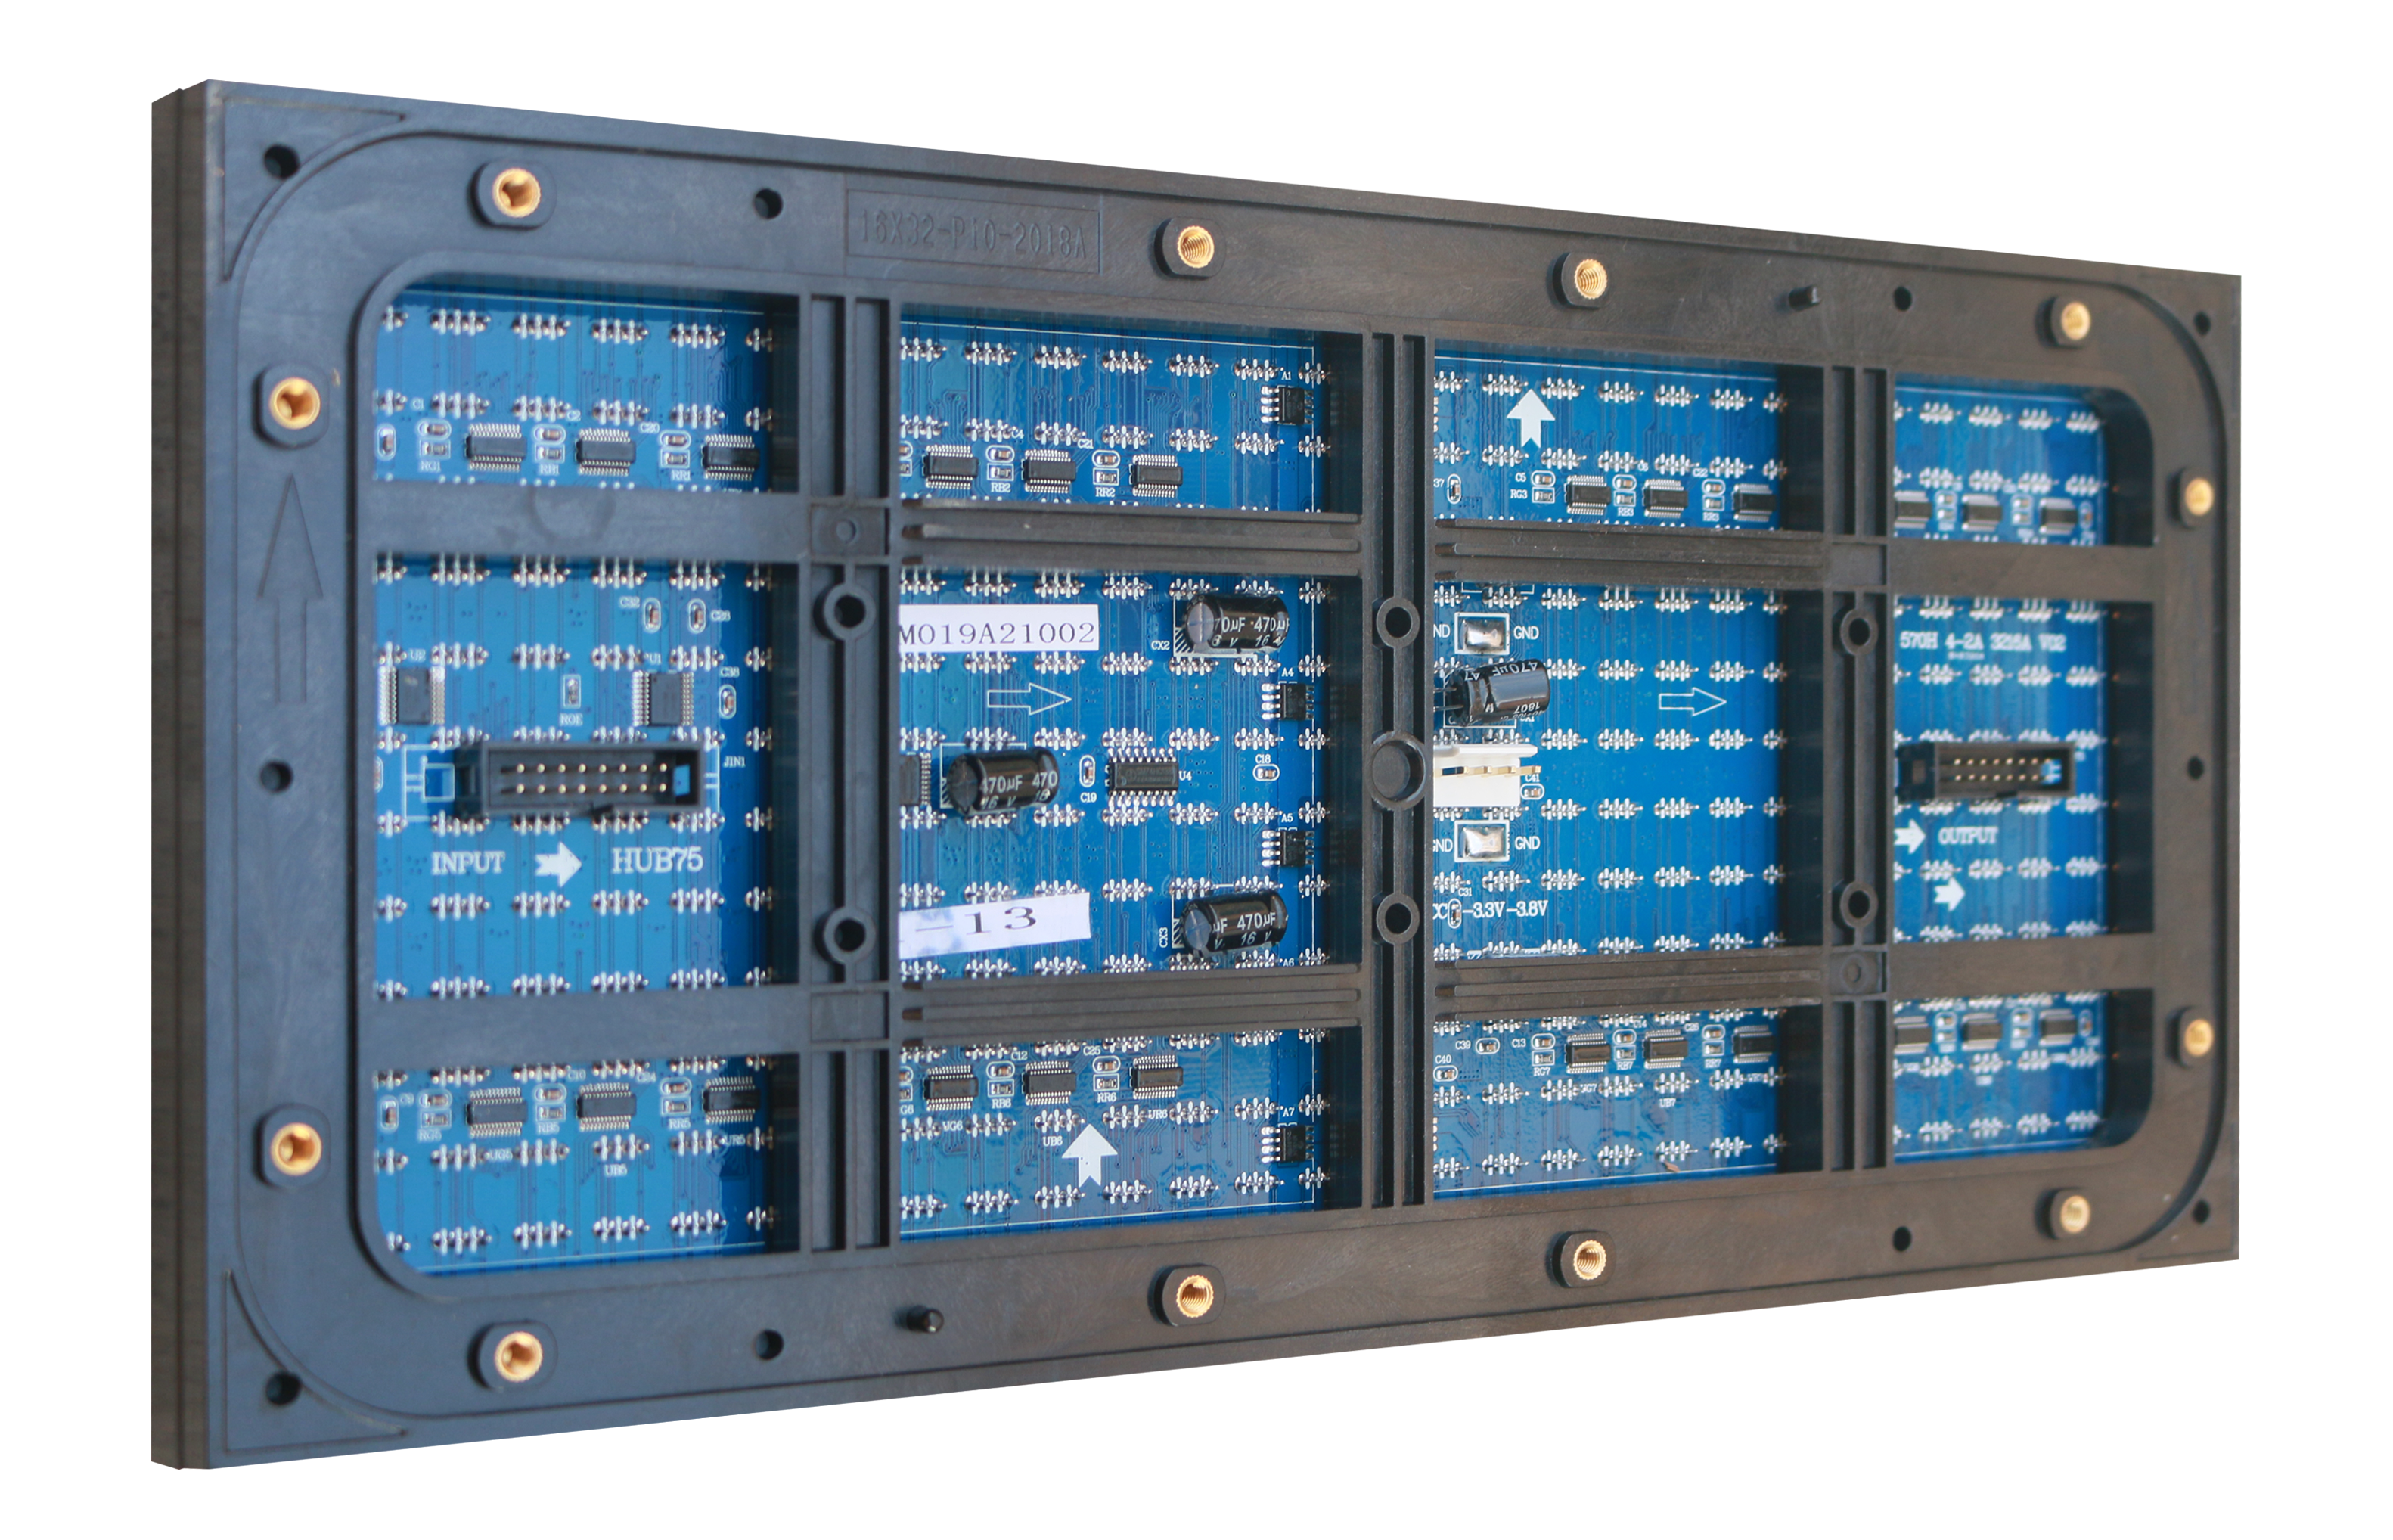 160mmx320mm P10 Outdoor DIP570 LED Display LED Module LED Panel